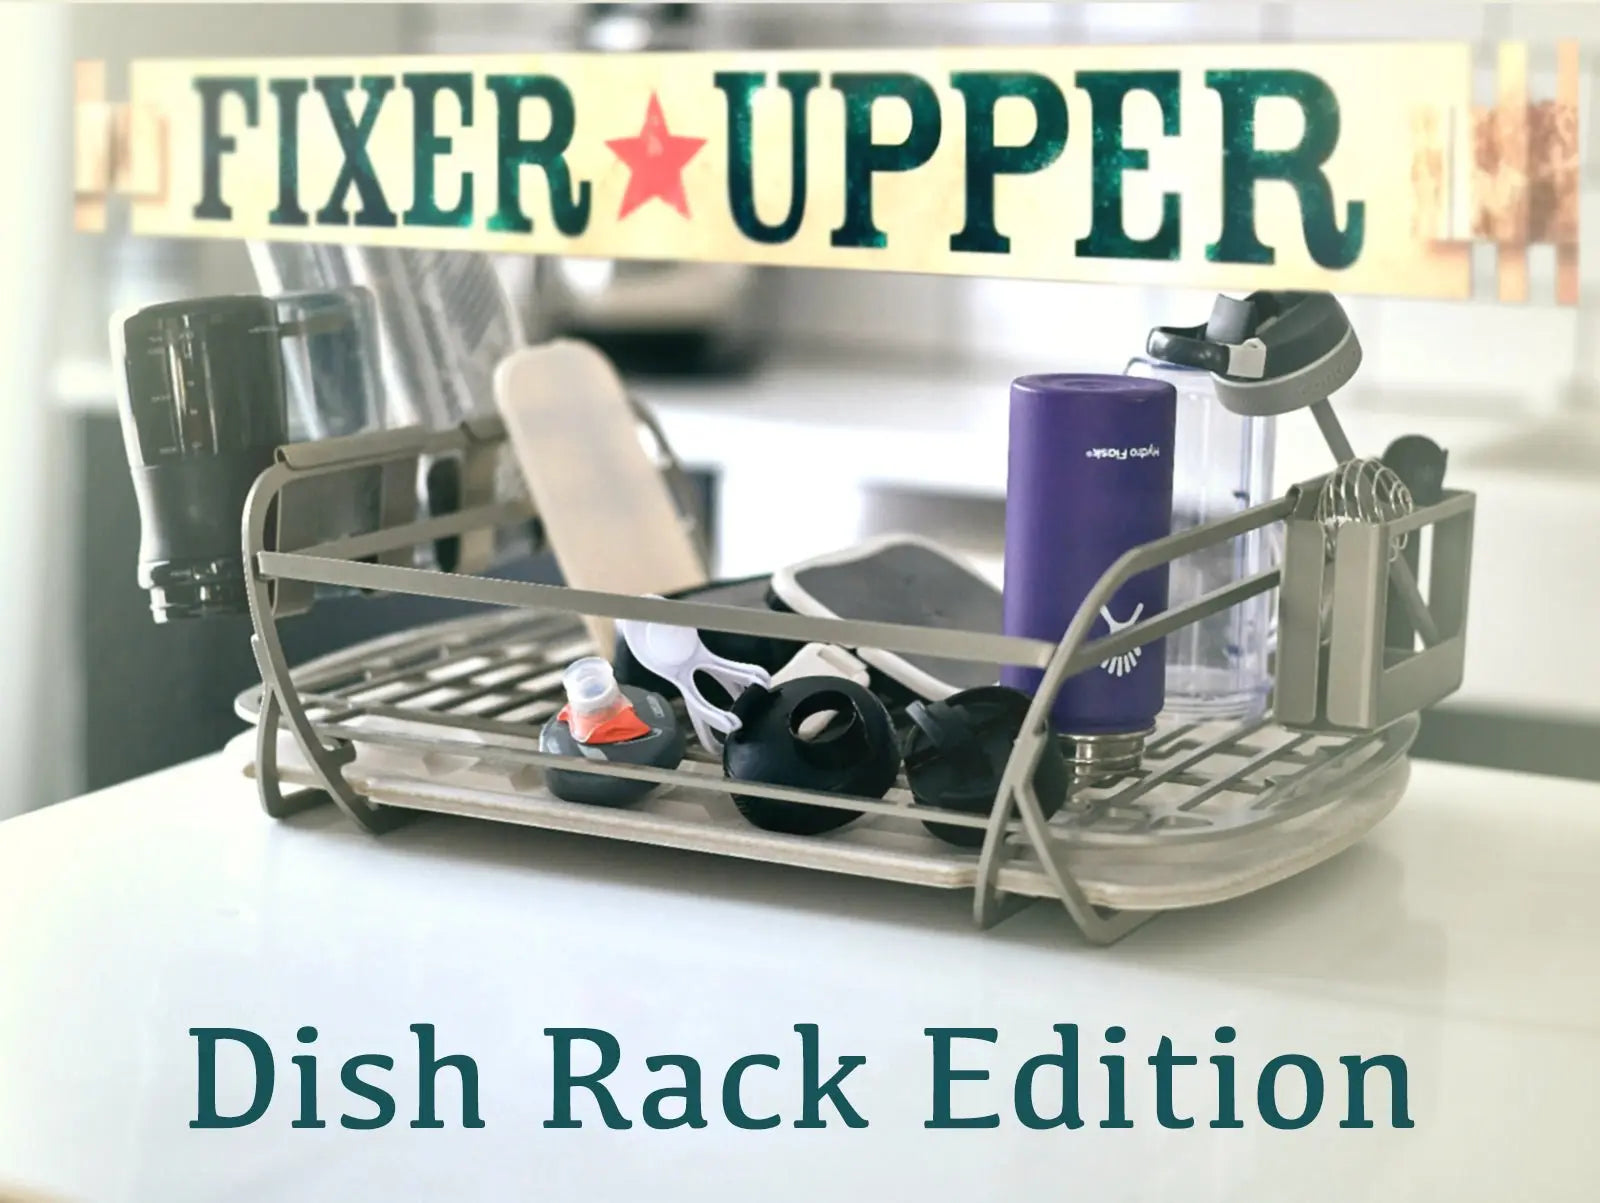 FixerUpper: Dish Rack Edition, check out these Before & After shots!